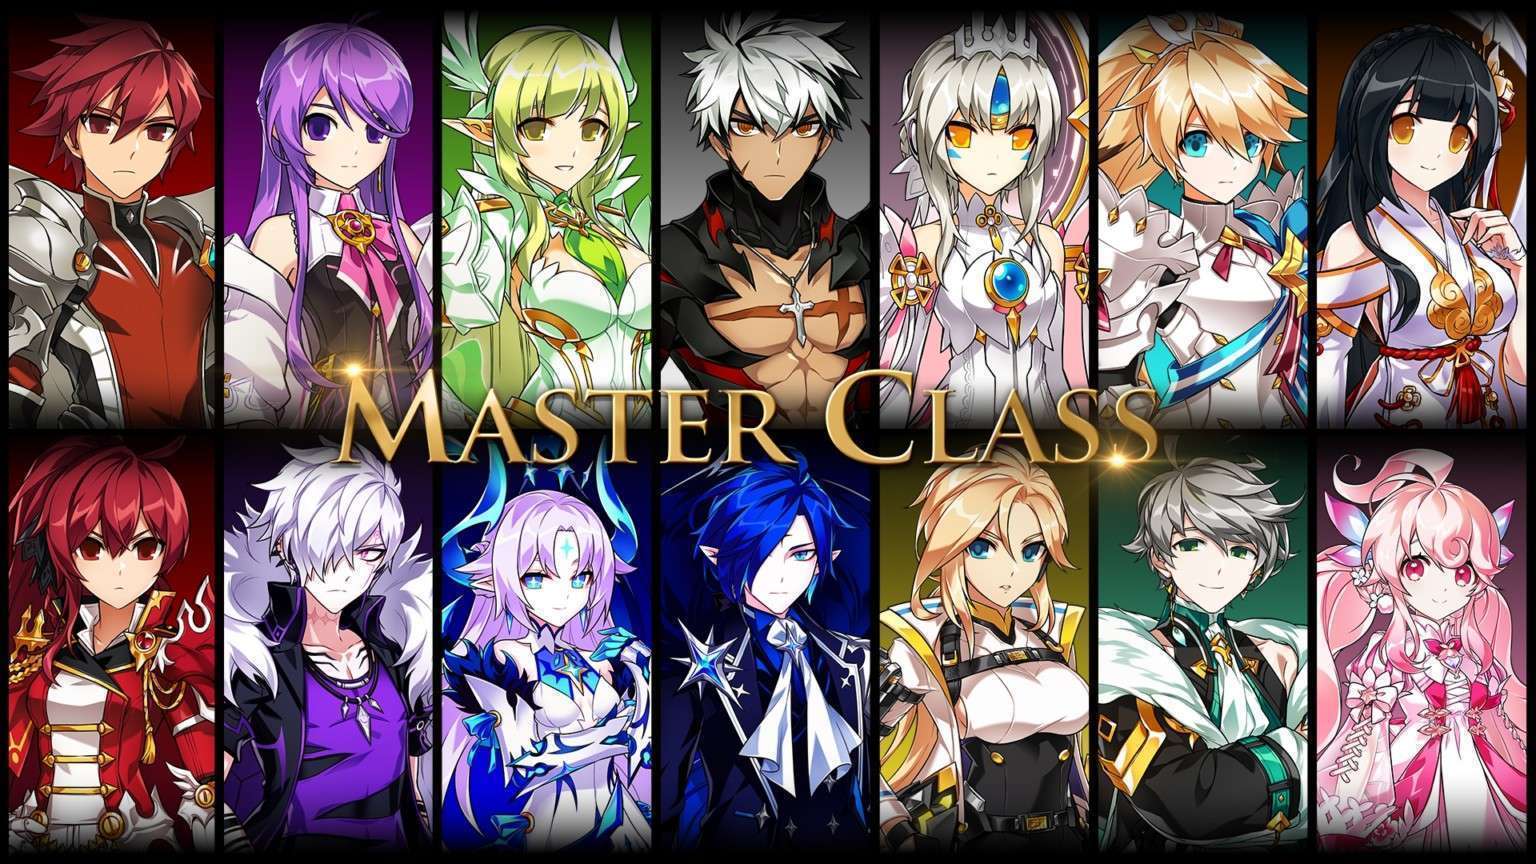 ELSWORD Lights Up the Holiday Season with both Master Class PreEvent